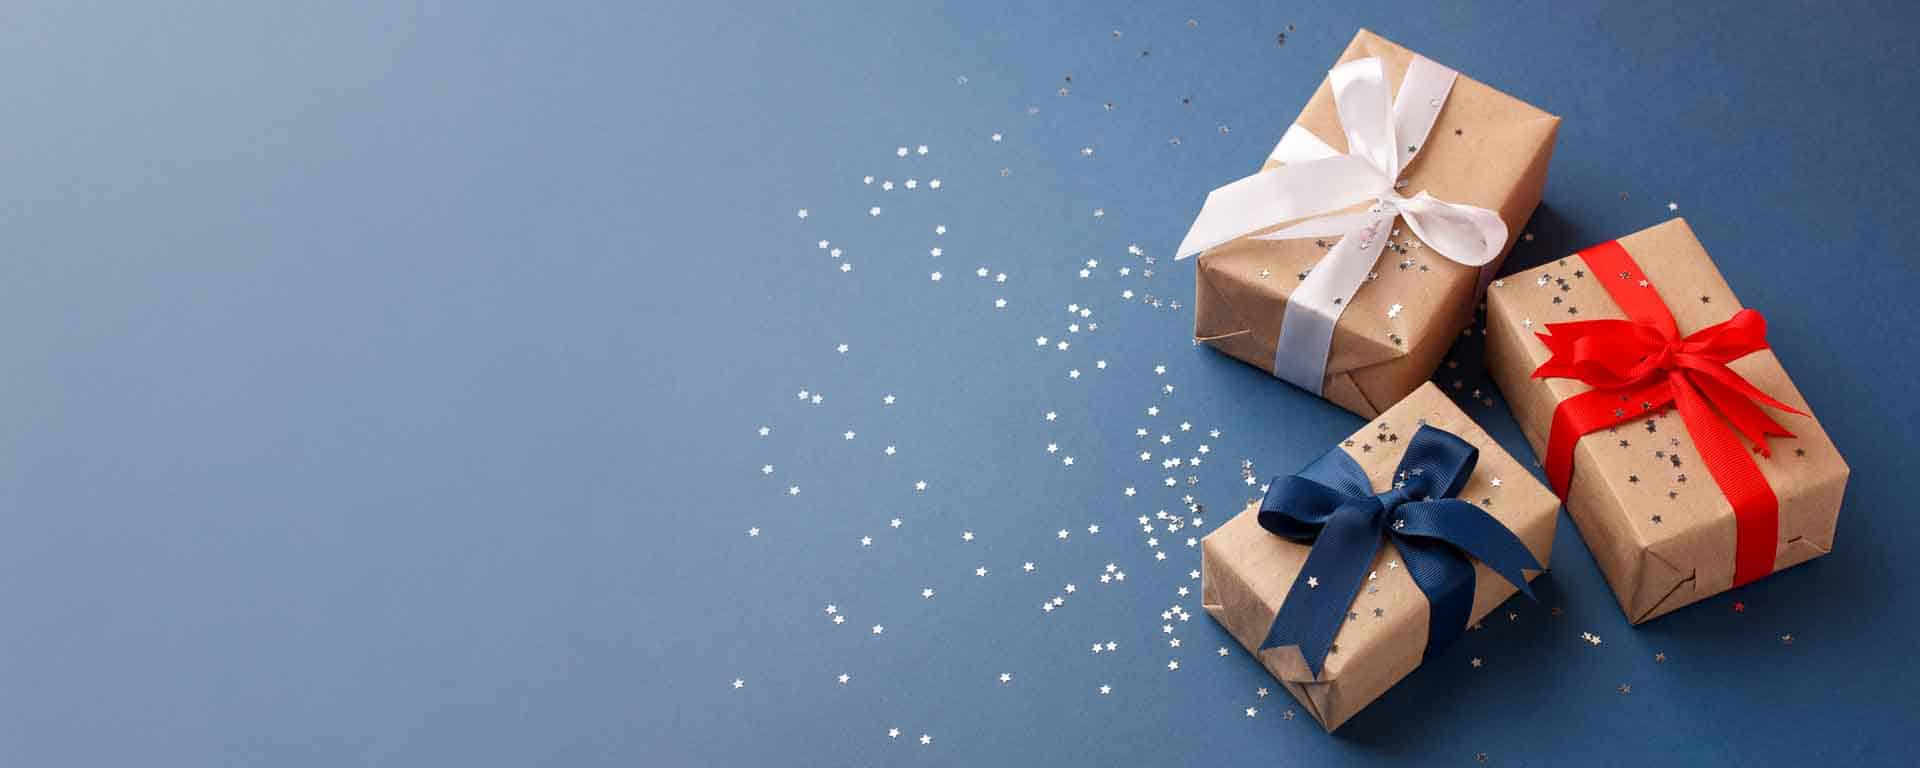 Wrapped Presents with glitter